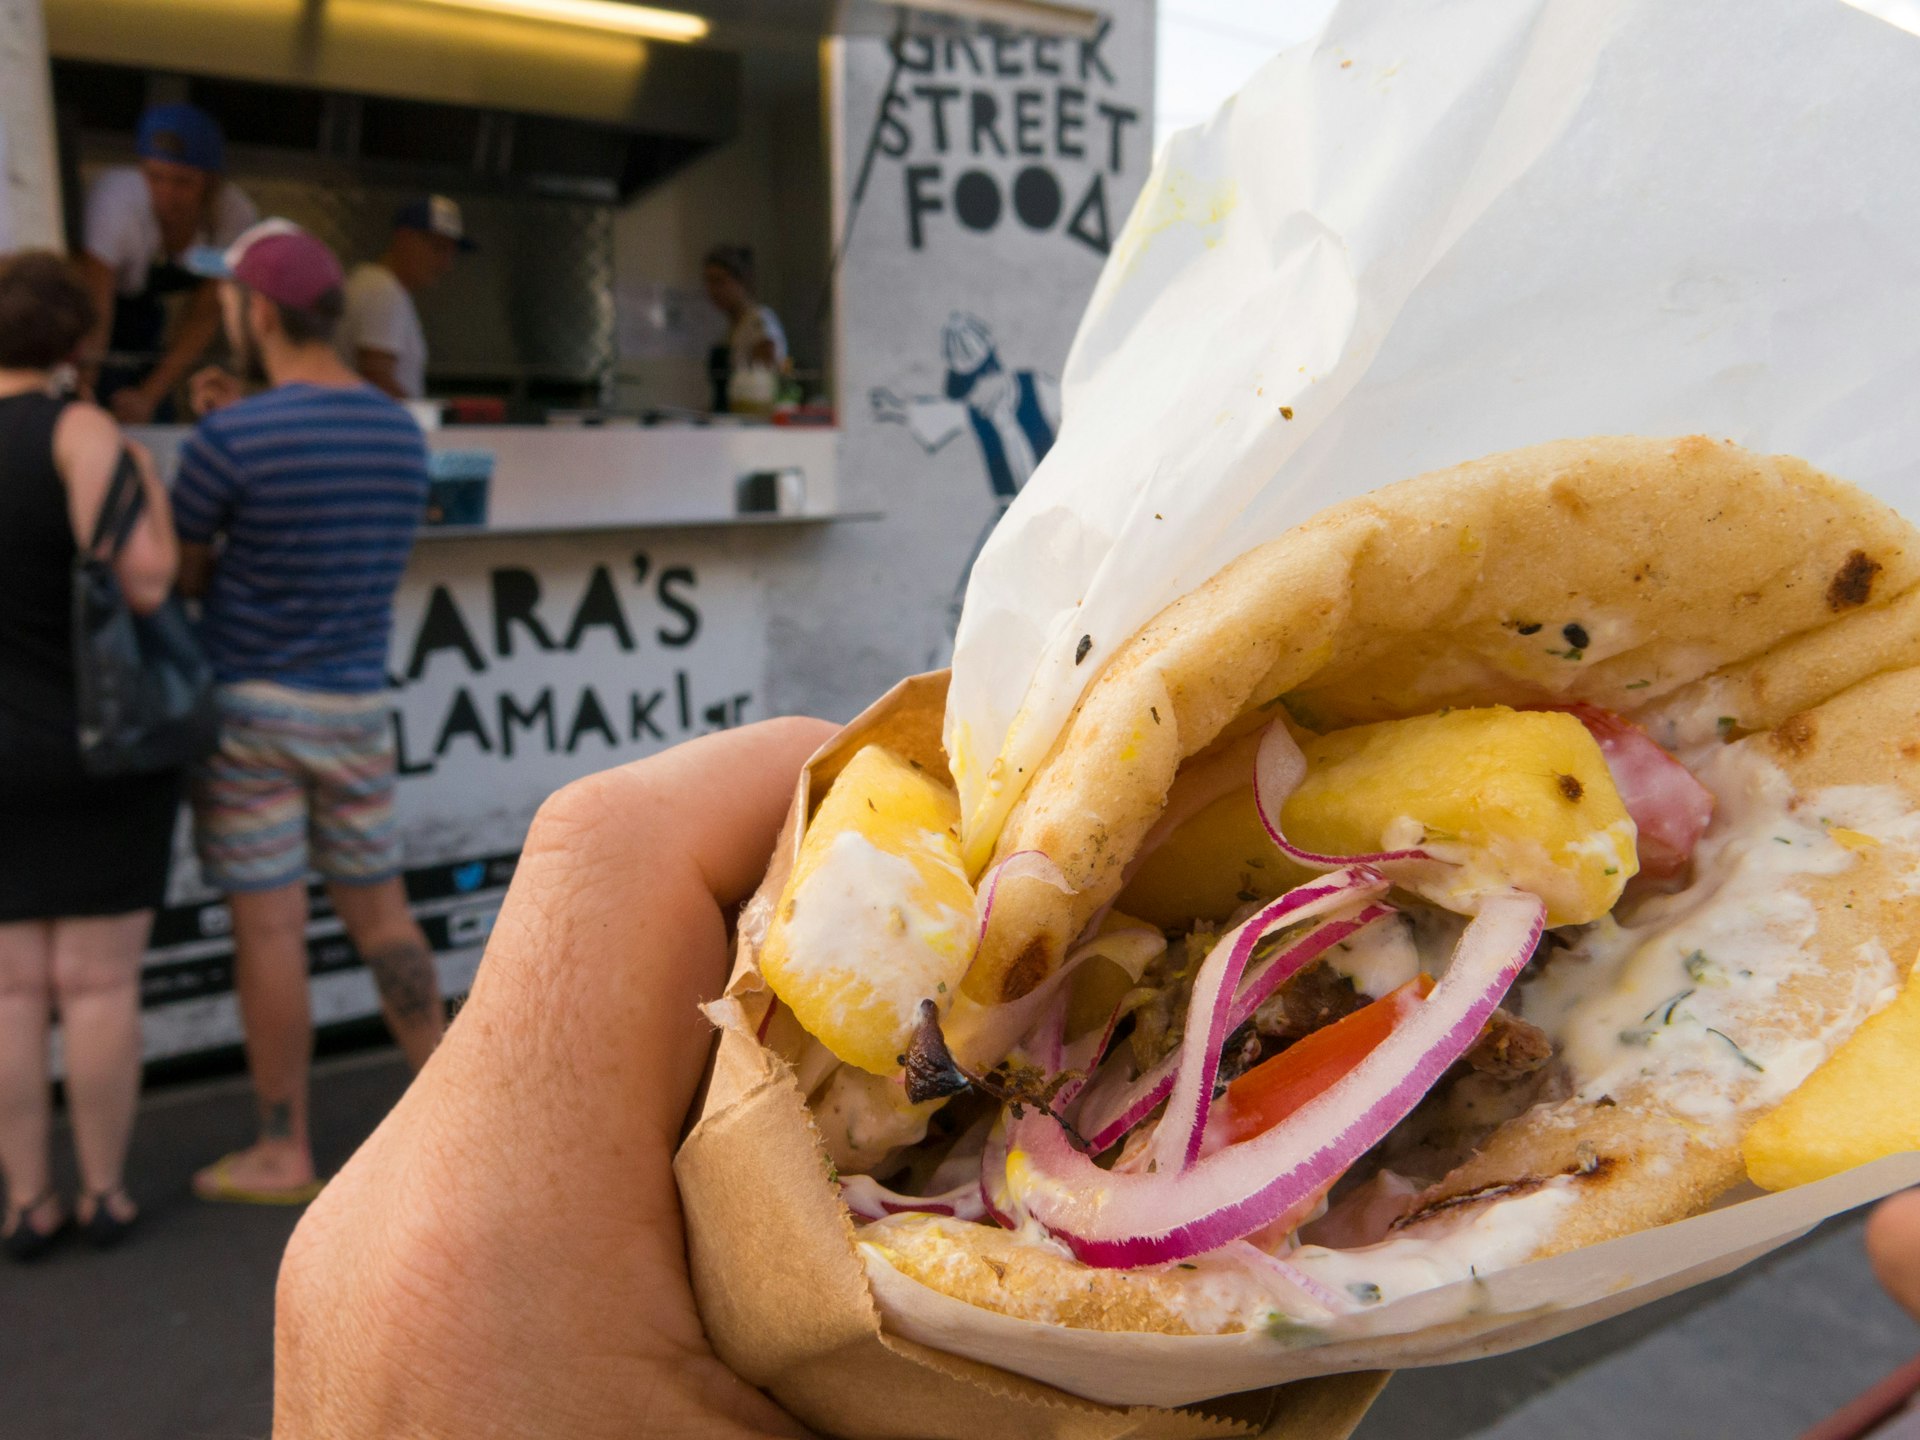 Diners have more than souvalki to choose from at Greek Street Food truck. Image by John Carney / Flickr